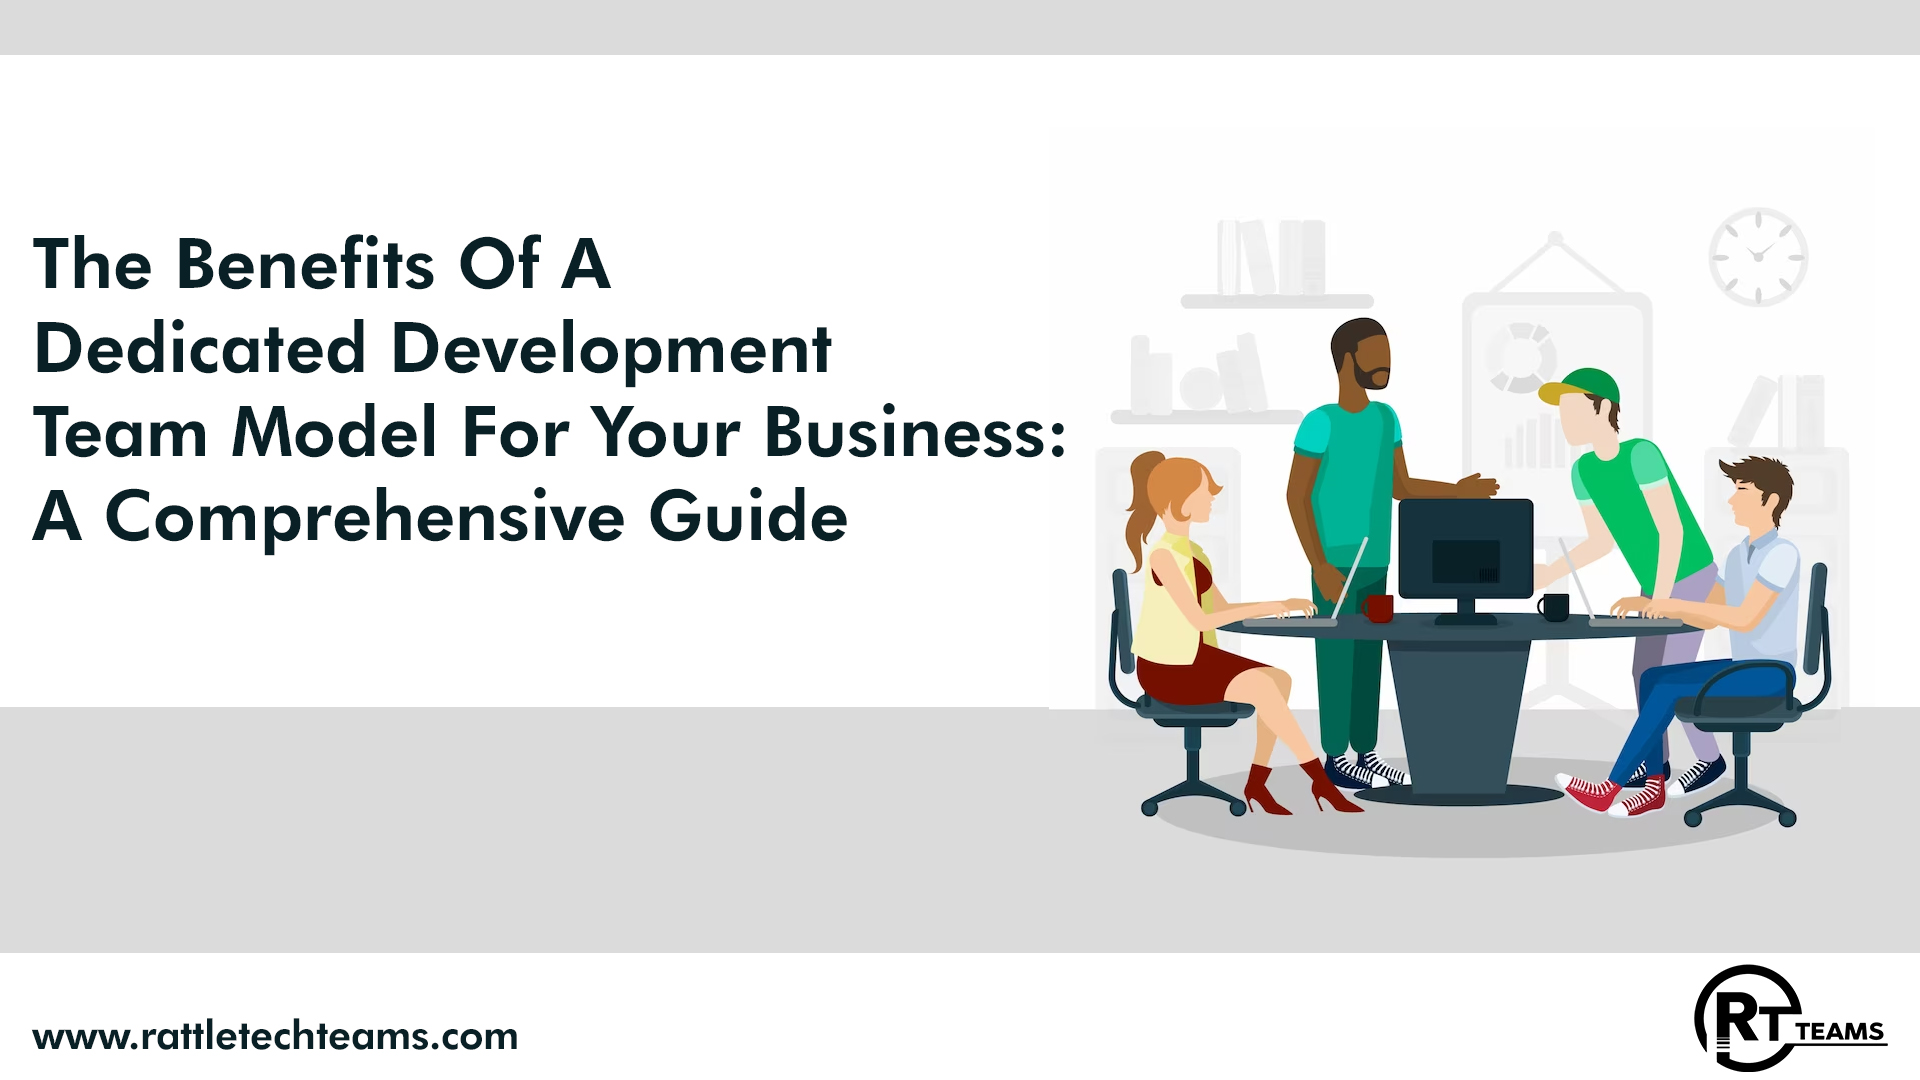 The Benefits of a Dedicated Development Team Model for Your Business: A Comprehensive Guide - Rattle Tech Teams